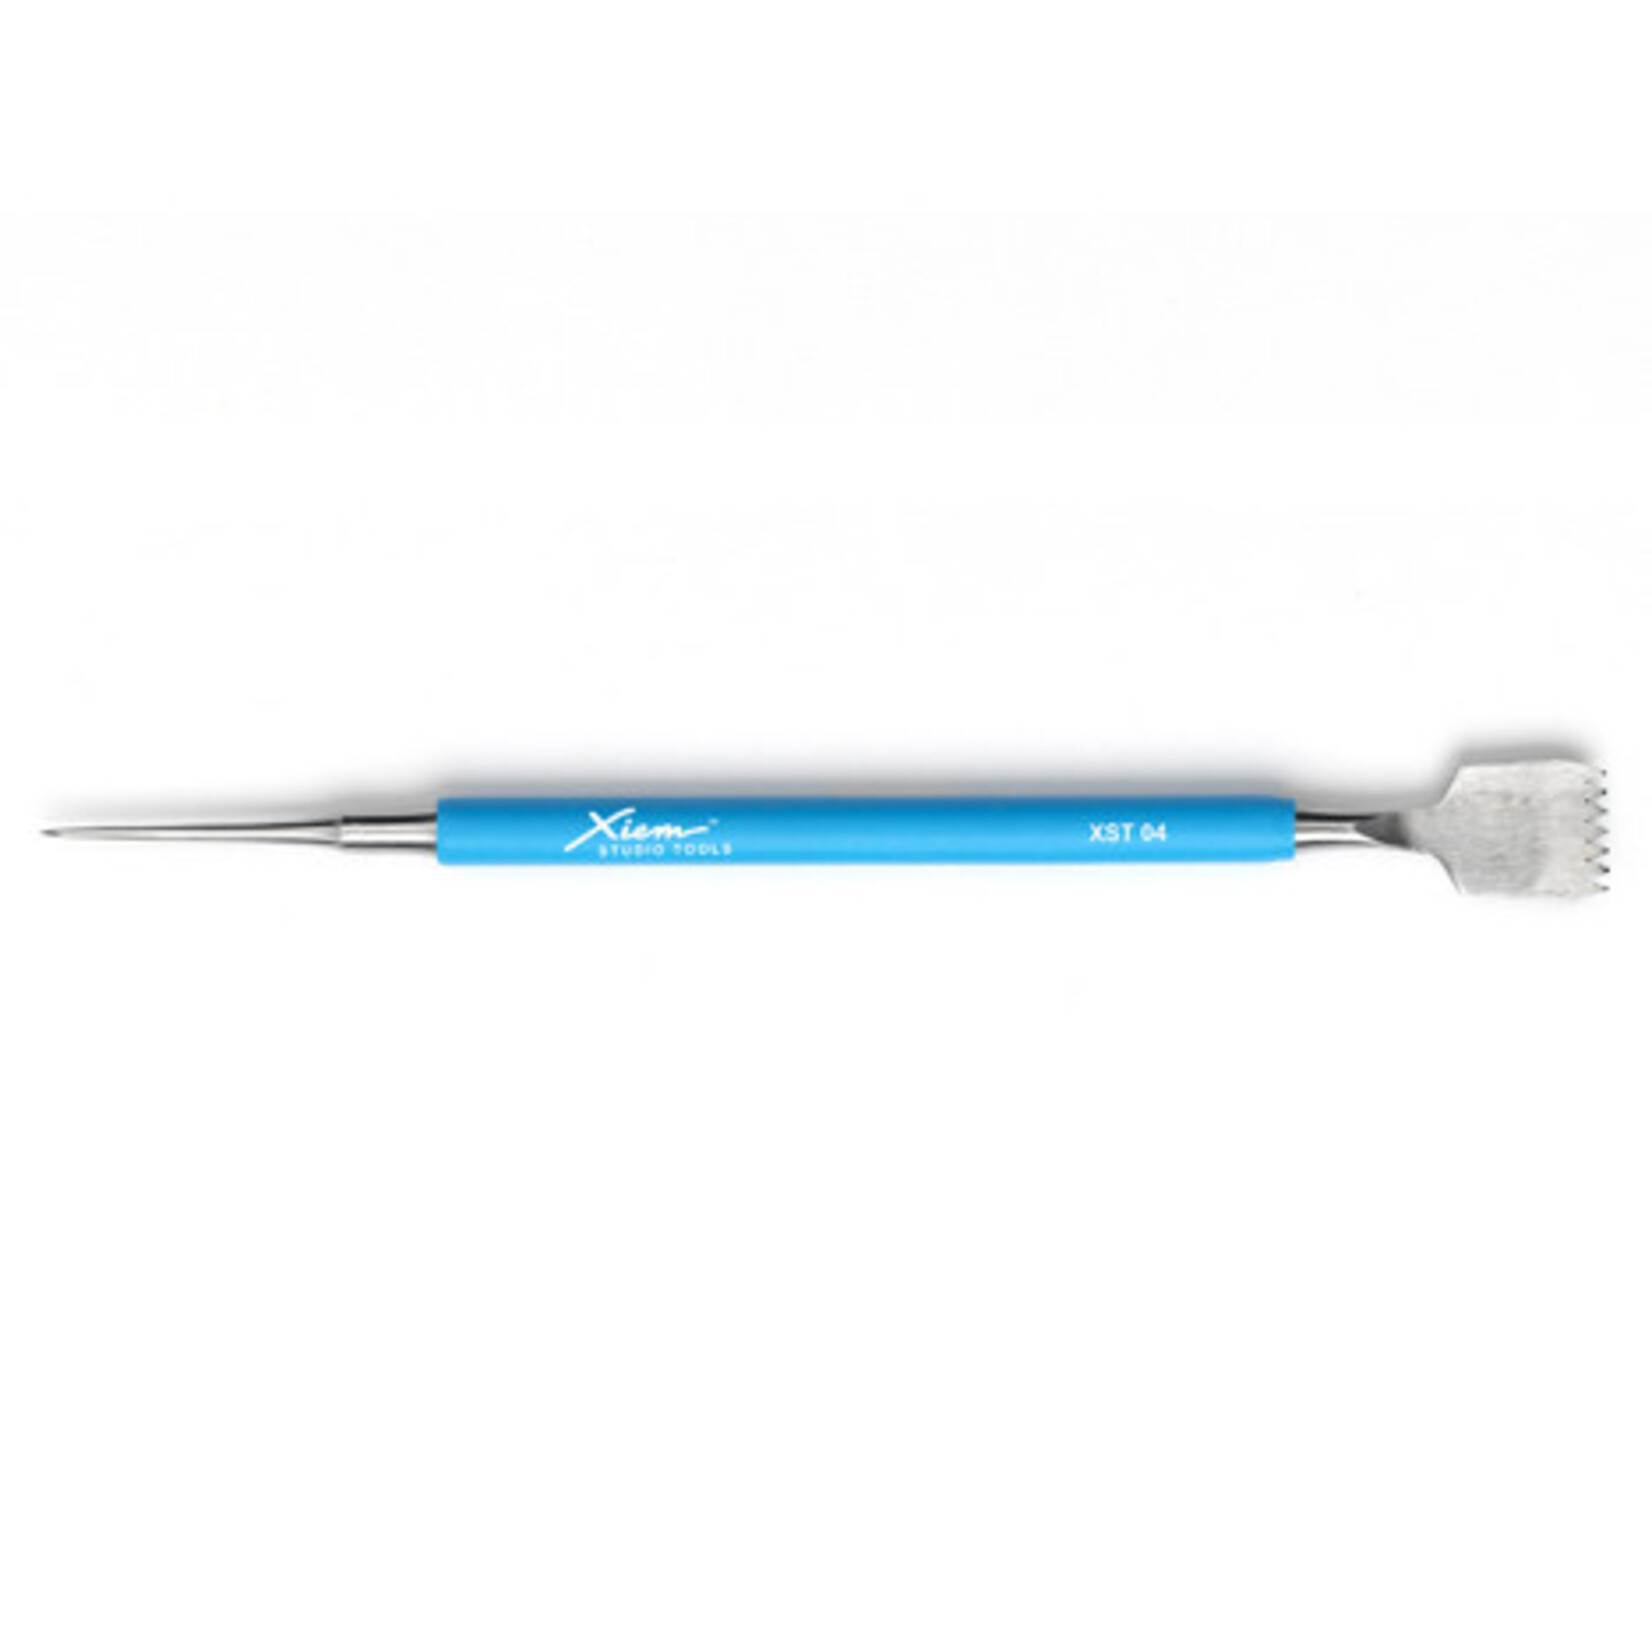 xiem Needle and Scoring Tool Double-End